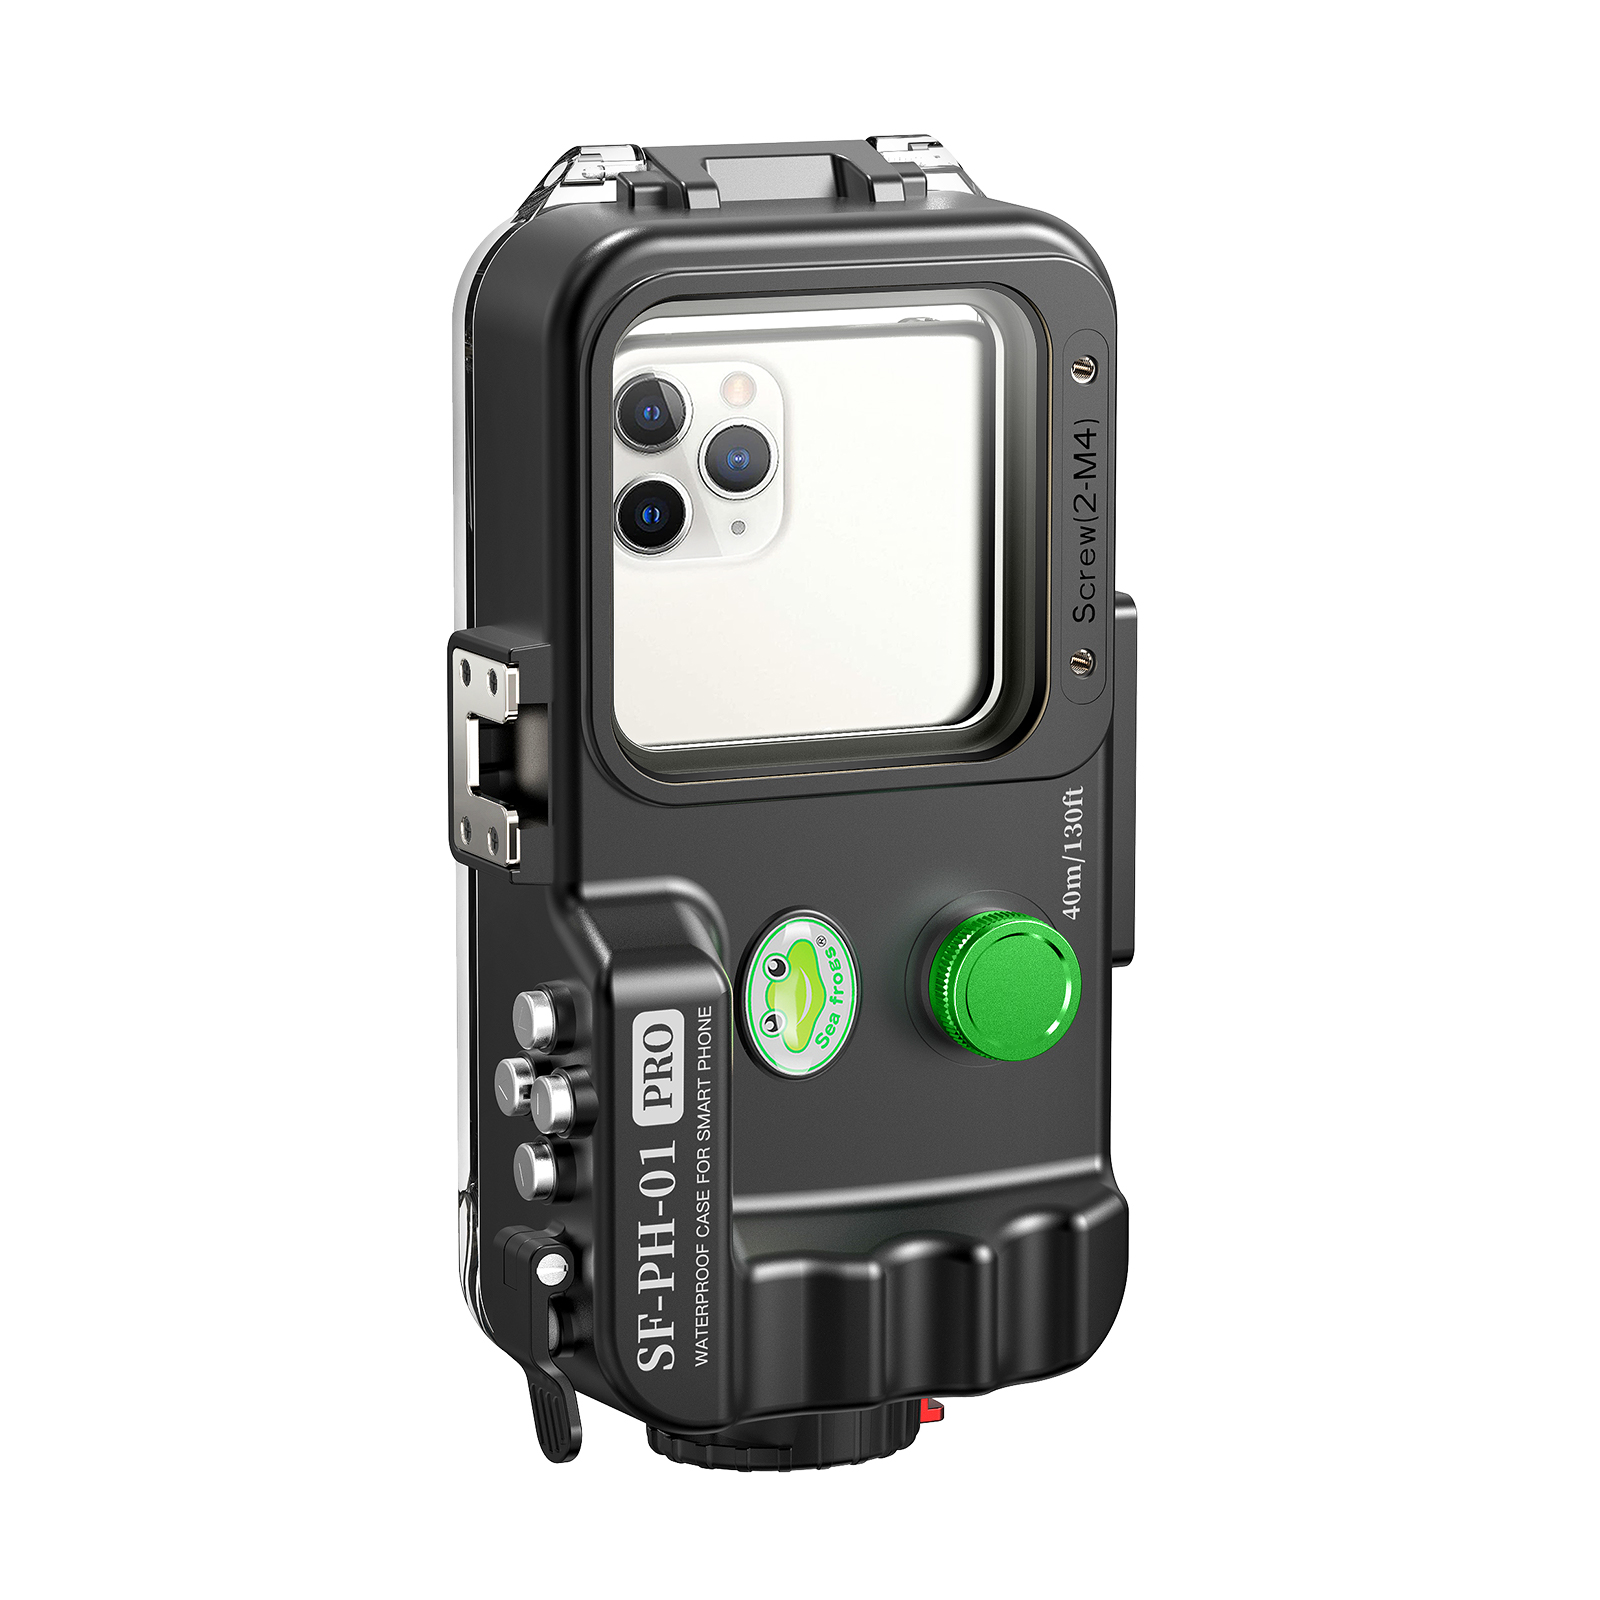 Seafrogs SF-PH-01 PRO Universal mobile phone,     